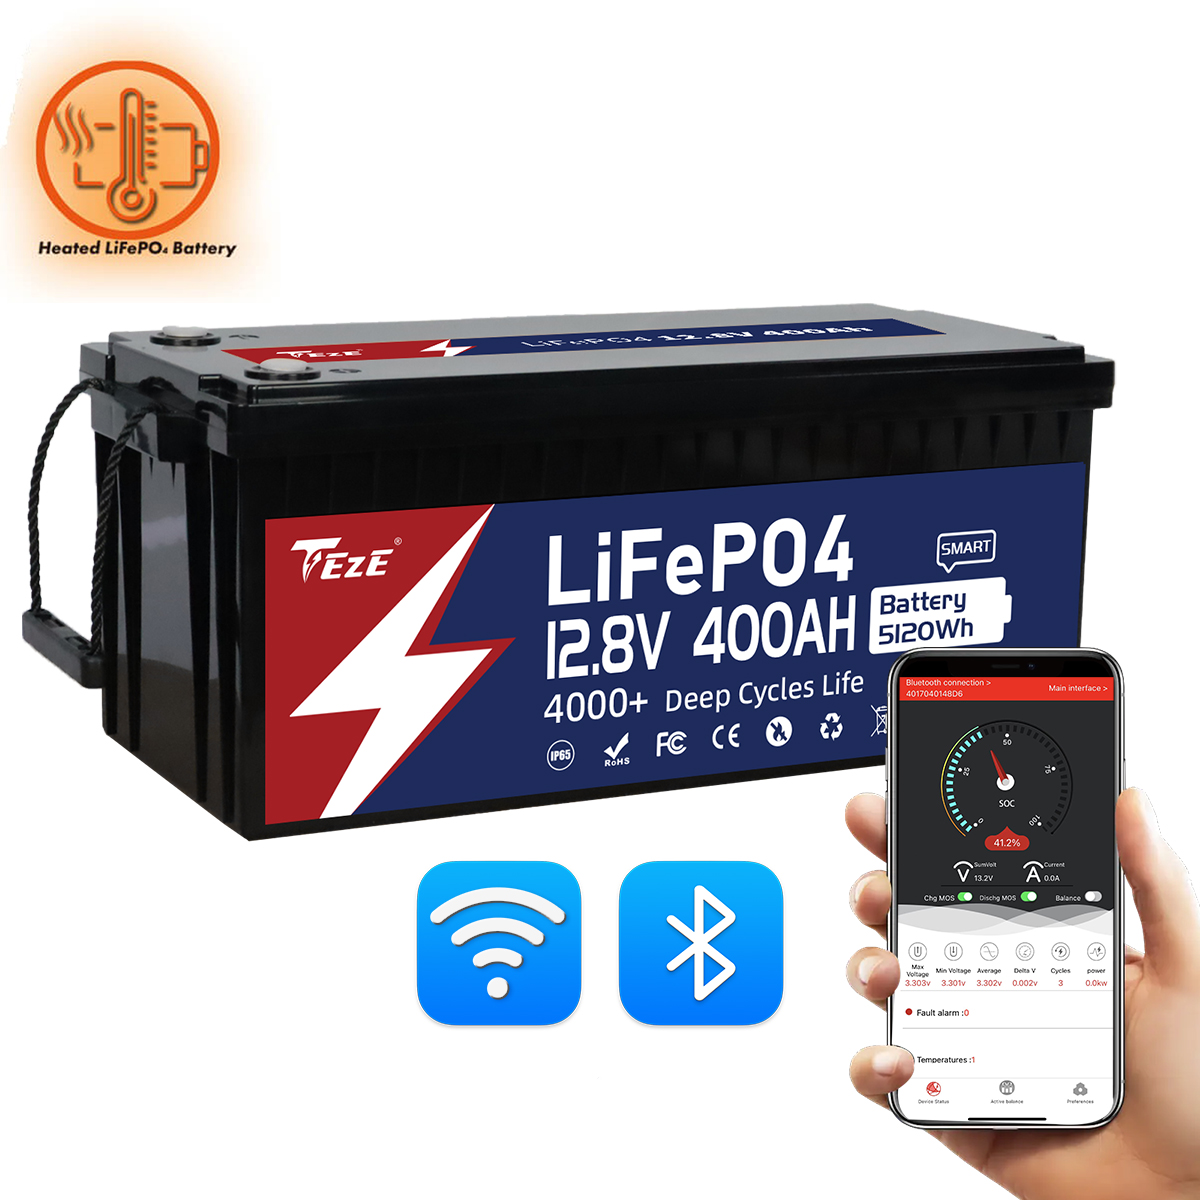 TezePower 12V 400Ah LiFePO4 Battery with RS485/RS232/CAN Communication Ports, WiFi and Bluetooth, Self-heating and Active Balancer, Built-in 250A Daly BMS(WiFi Built-in Version)-TezePower